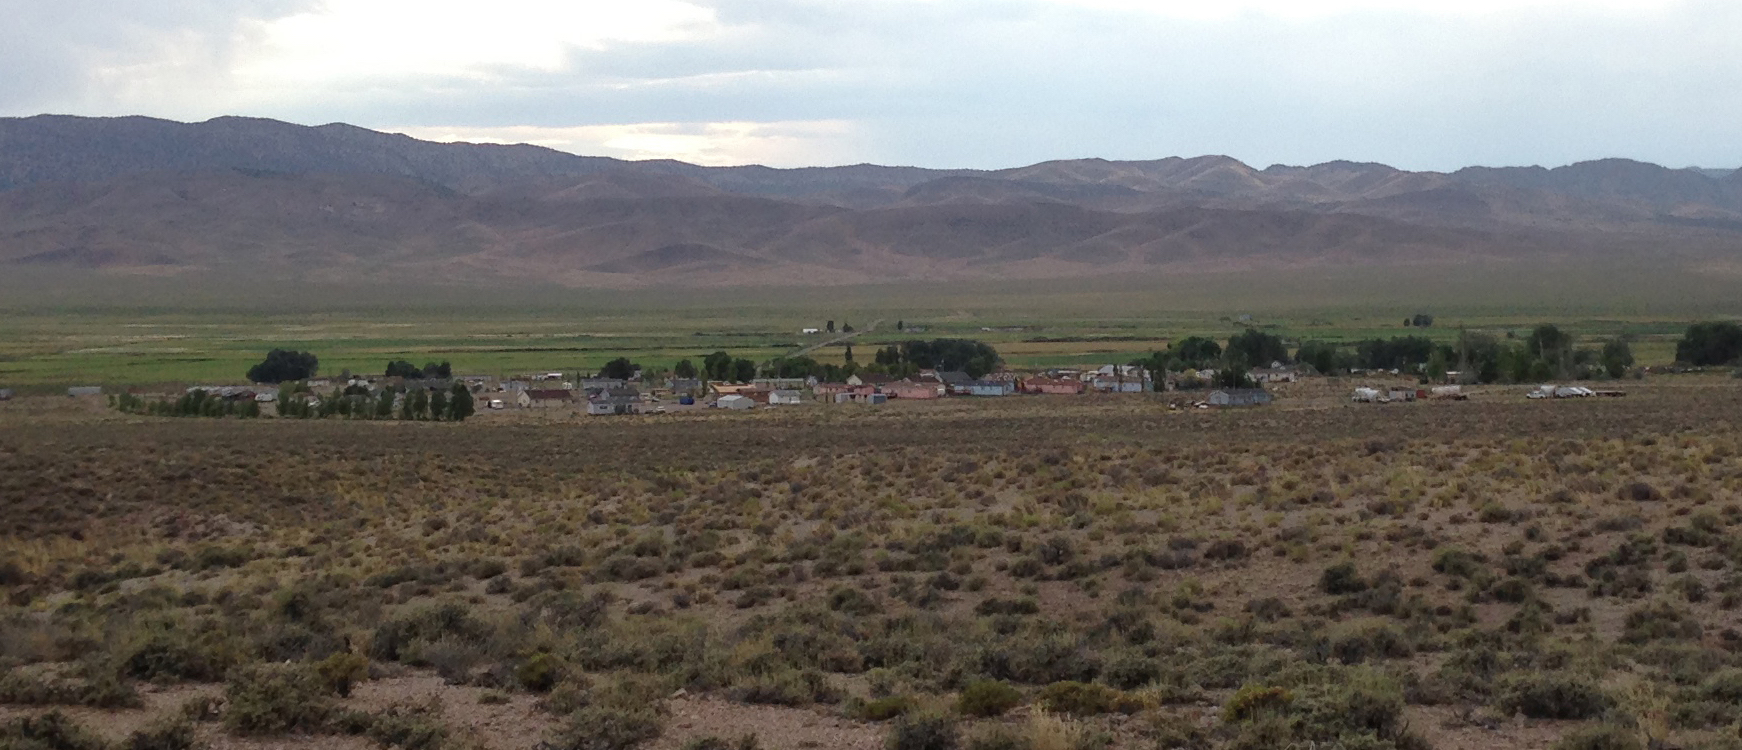 landscape view of town of duckwater in mountain valley